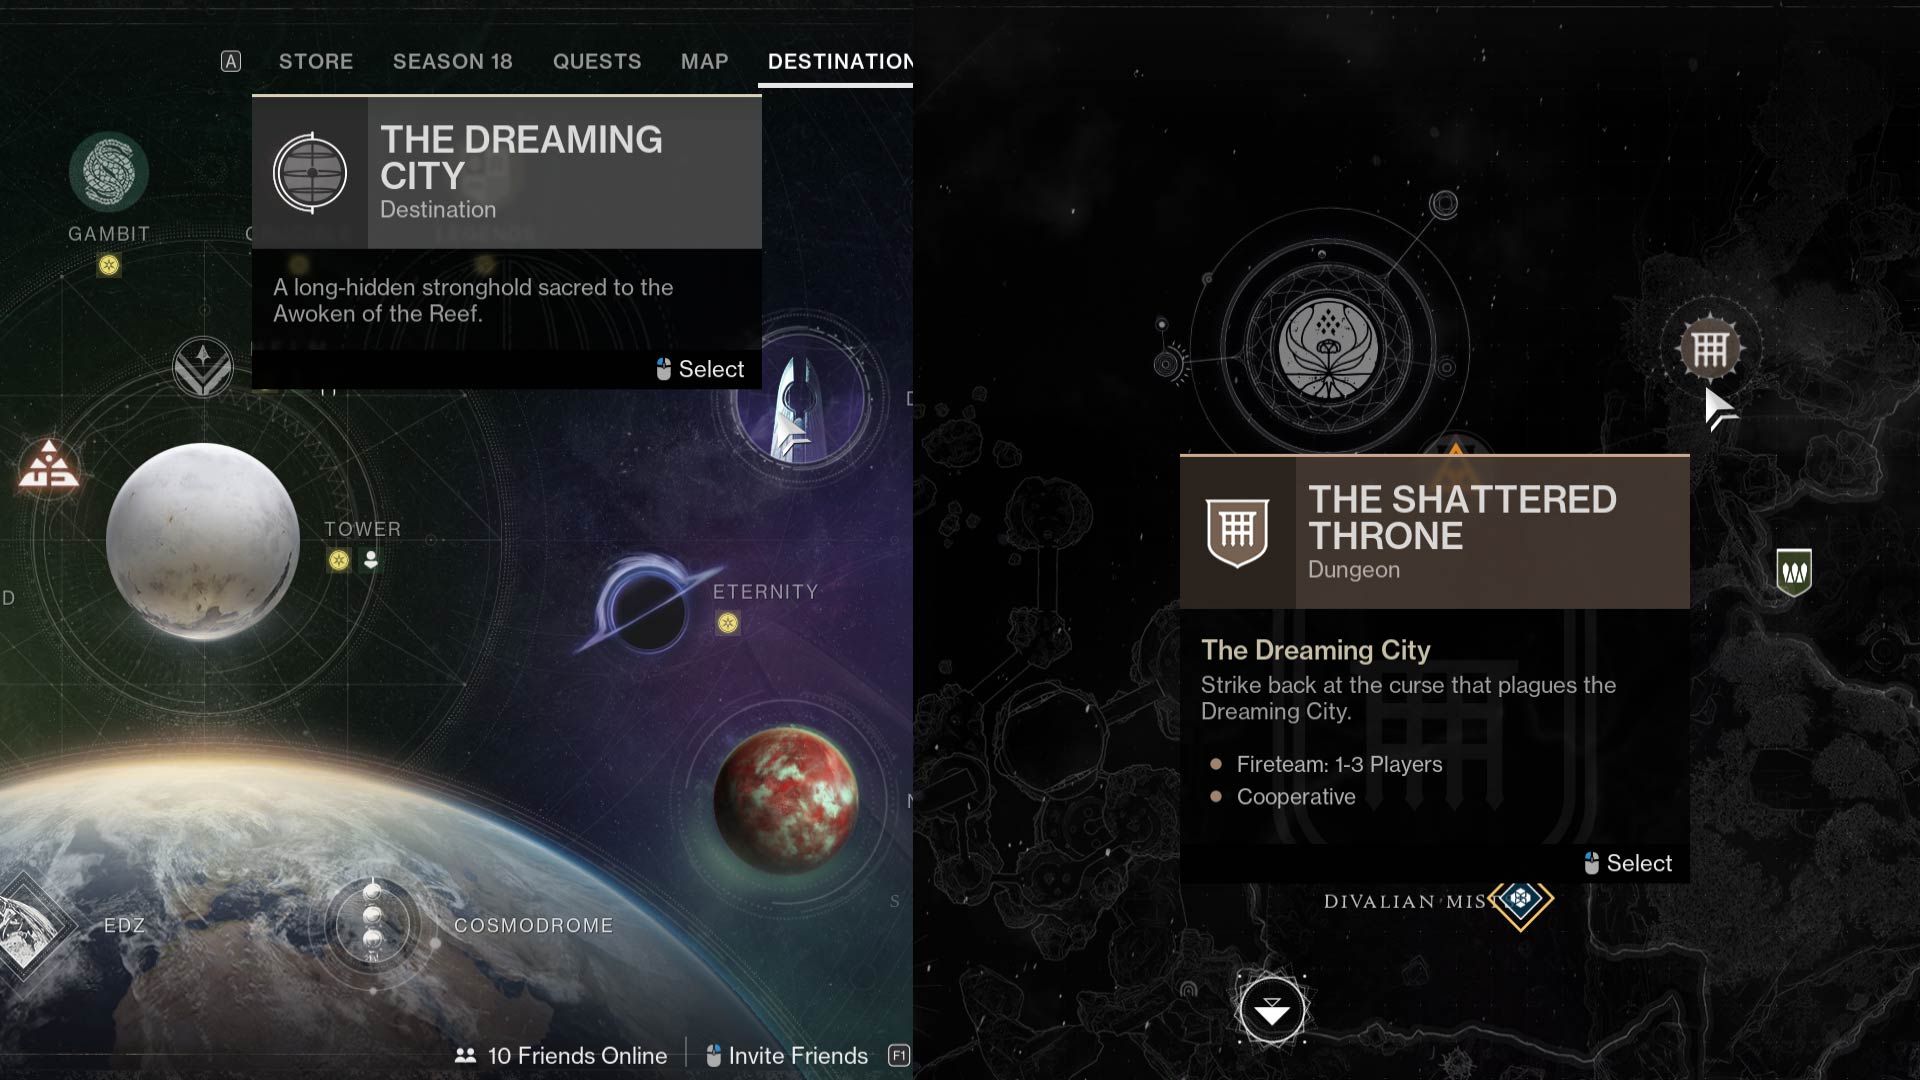 The Shattered Throne Location